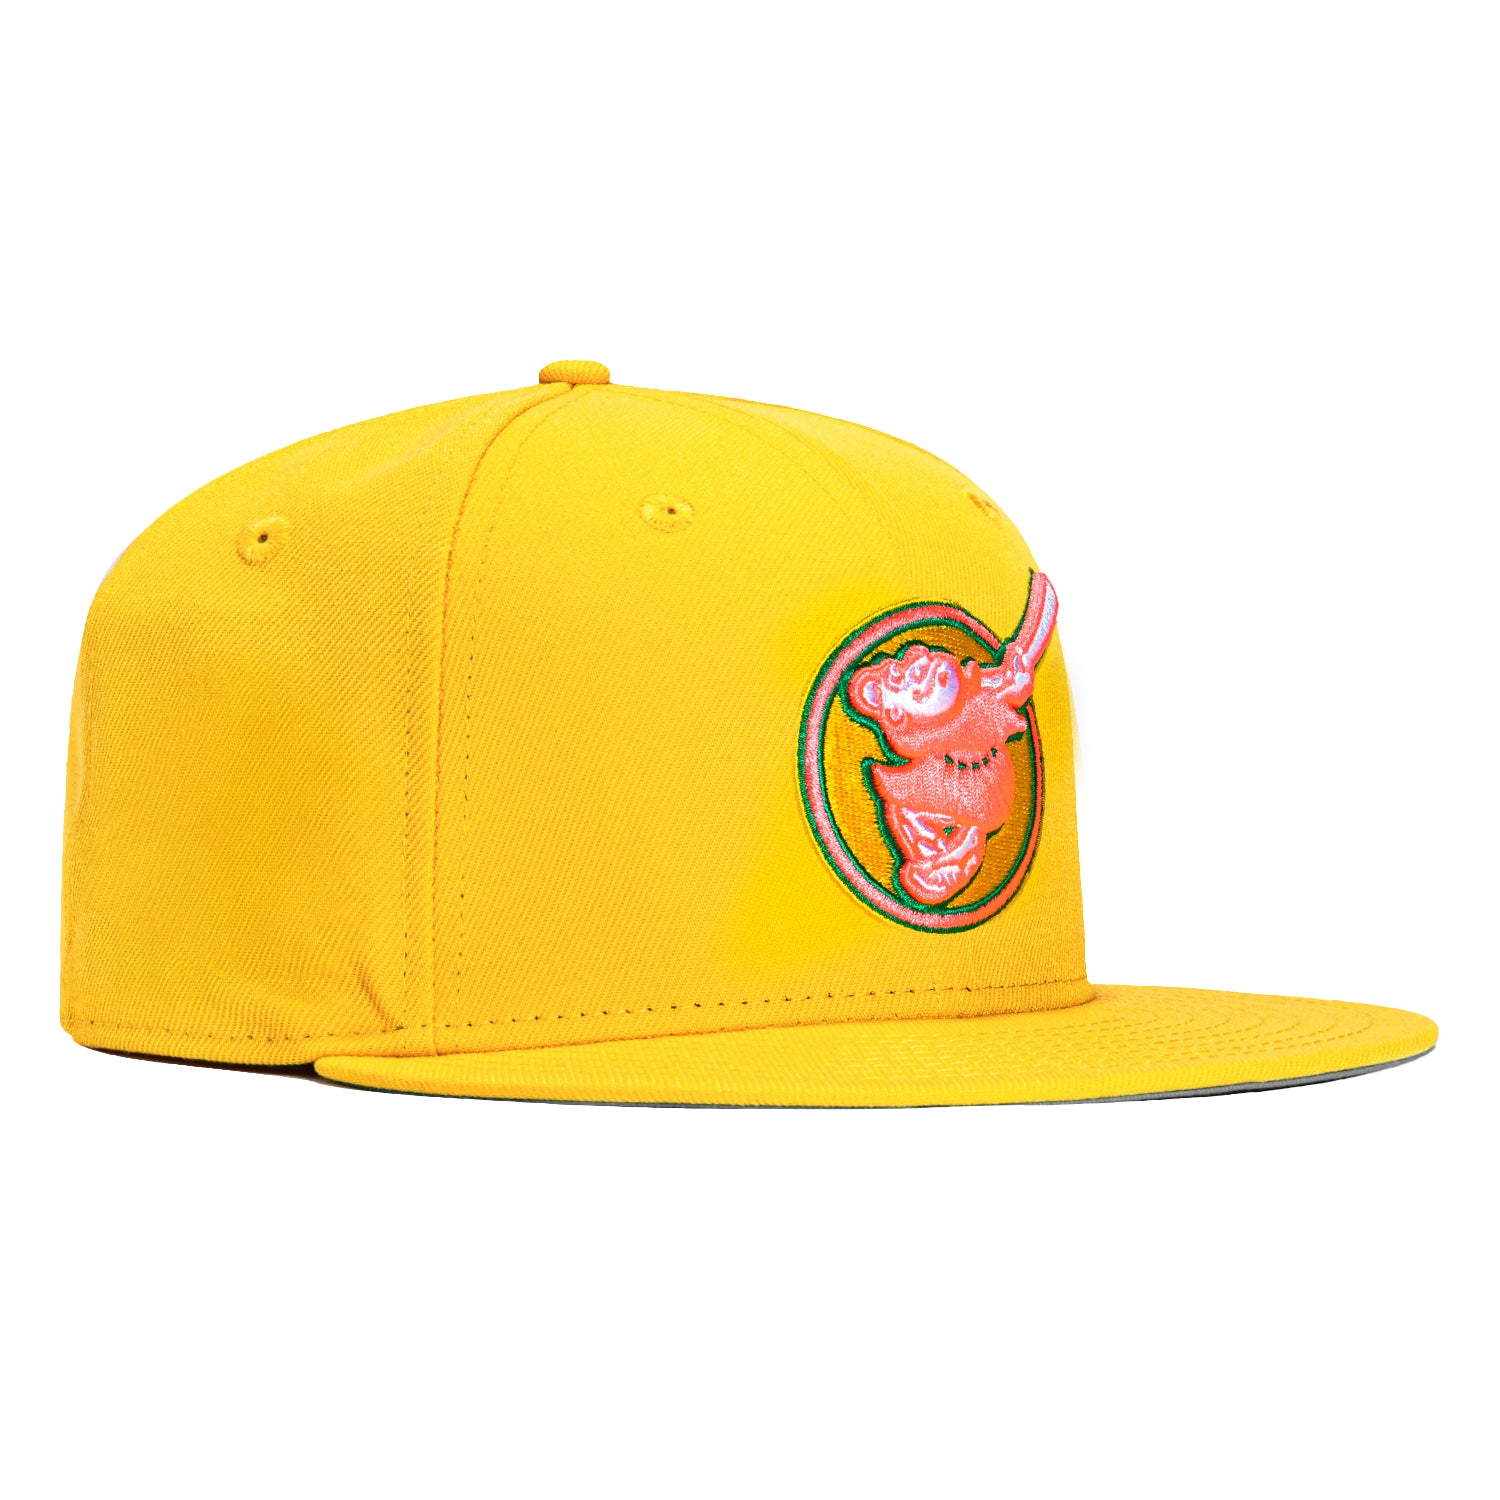 sd padres city connect hat